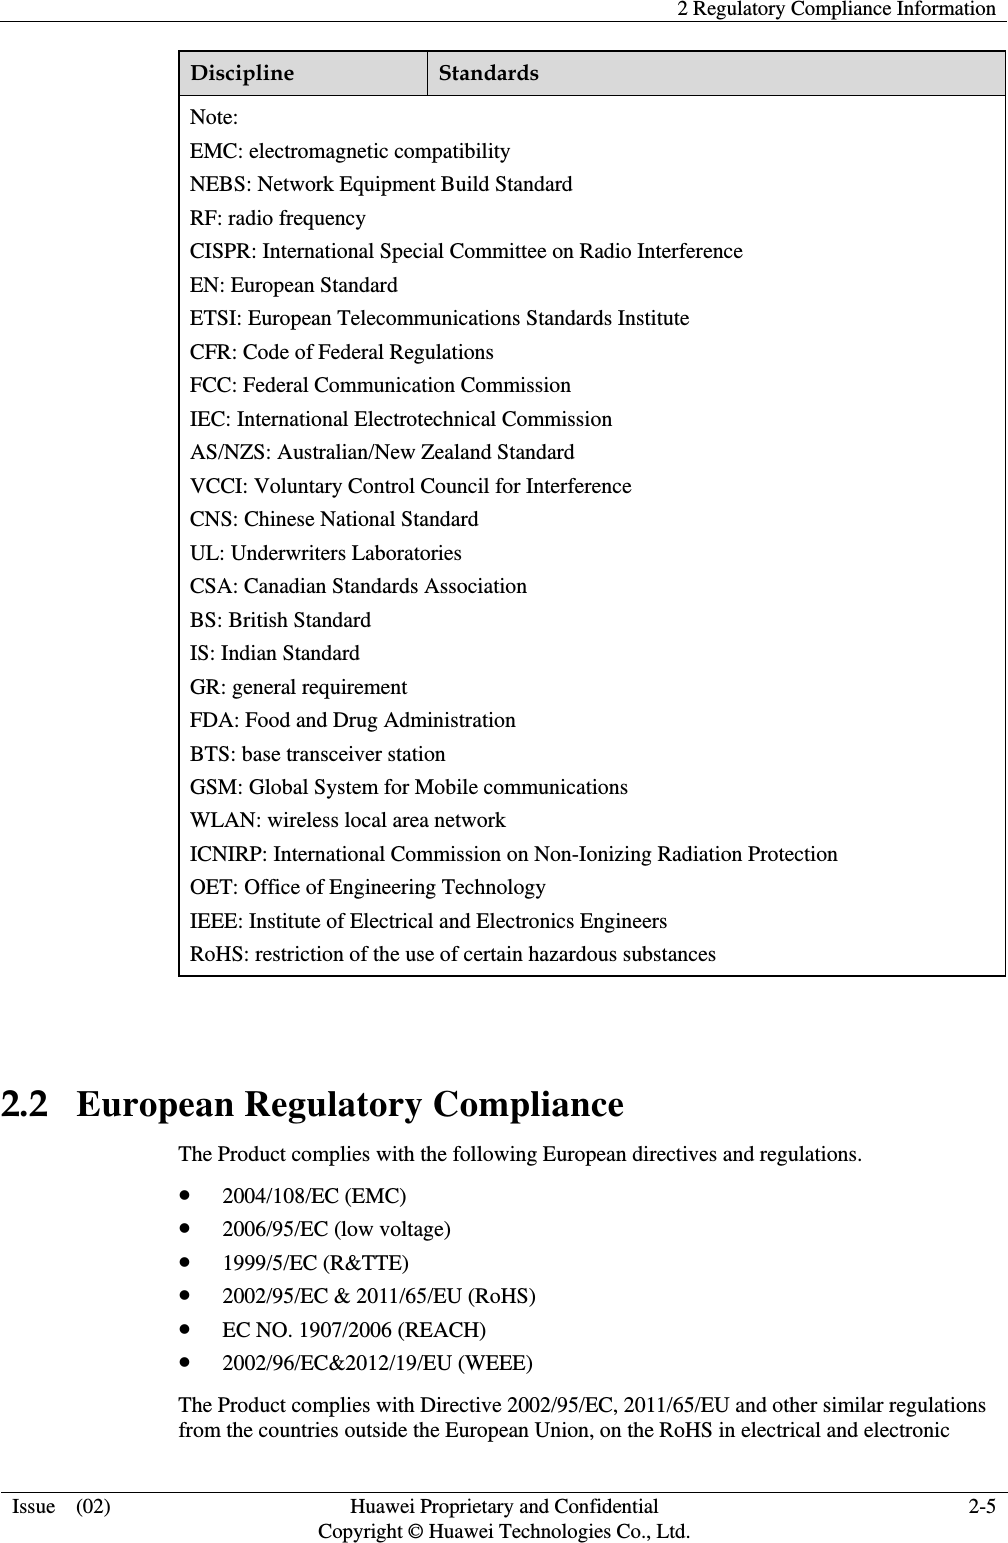    2 Regulatory Compliance Information  Issue  (02)  Huawei Proprietary and Confidential     Copyright © Huawei Technologies Co., Ltd. 2-5 Discipline  Standards Note: EMC: electromagnetic compatibility NEBS: Network Equipment Build Standard RF: radio frequency CISPR: International Special Committee on Radio Interference EN: European Standard ETSI: European Telecommunications Standards Institute CFR: Code of Federal Regulations FCC: Federal Communication Commission IEC: International Electrotechnical Commission AS/NZS: Australian/New Zealand Standard VCCI: Voluntary Control Council for Interference CNS: Chinese National Standard UL: Underwriters Laboratories CSA: Canadian Standards Association BS: British Standard IS: Indian Standard GR: general requirement FDA: Food and Drug Administration BTS: base transceiver station GSM: Global System for Mobile communications WLAN: wireless local area network ICNIRP: International Commission on Non-Ionizing Radiation Protection OET: Office of Engineering Technology IEEE: Institute of Electrical and Electronics Engineers RoHS: restriction of the use of certain hazardous substances  2.2   European Regulatory Compliance The Product complies with the following European directives and regulations. z 2004/108/EC (EMC) z 2006/95/EC (low voltage) z 1999/5/EC (R&amp;TTE) z 2002/95/EC &amp; 2011/65/EU (RoHS) z EC NO. 1907/2006 (REACH) z 2002/96/EC&amp;2012/19/EU (WEEE) The Product complies with Directive 2002/95/EC, 2011/65/EU and other similar regulations from the countries outside the European Union, on the RoHS in electrical and electronic 